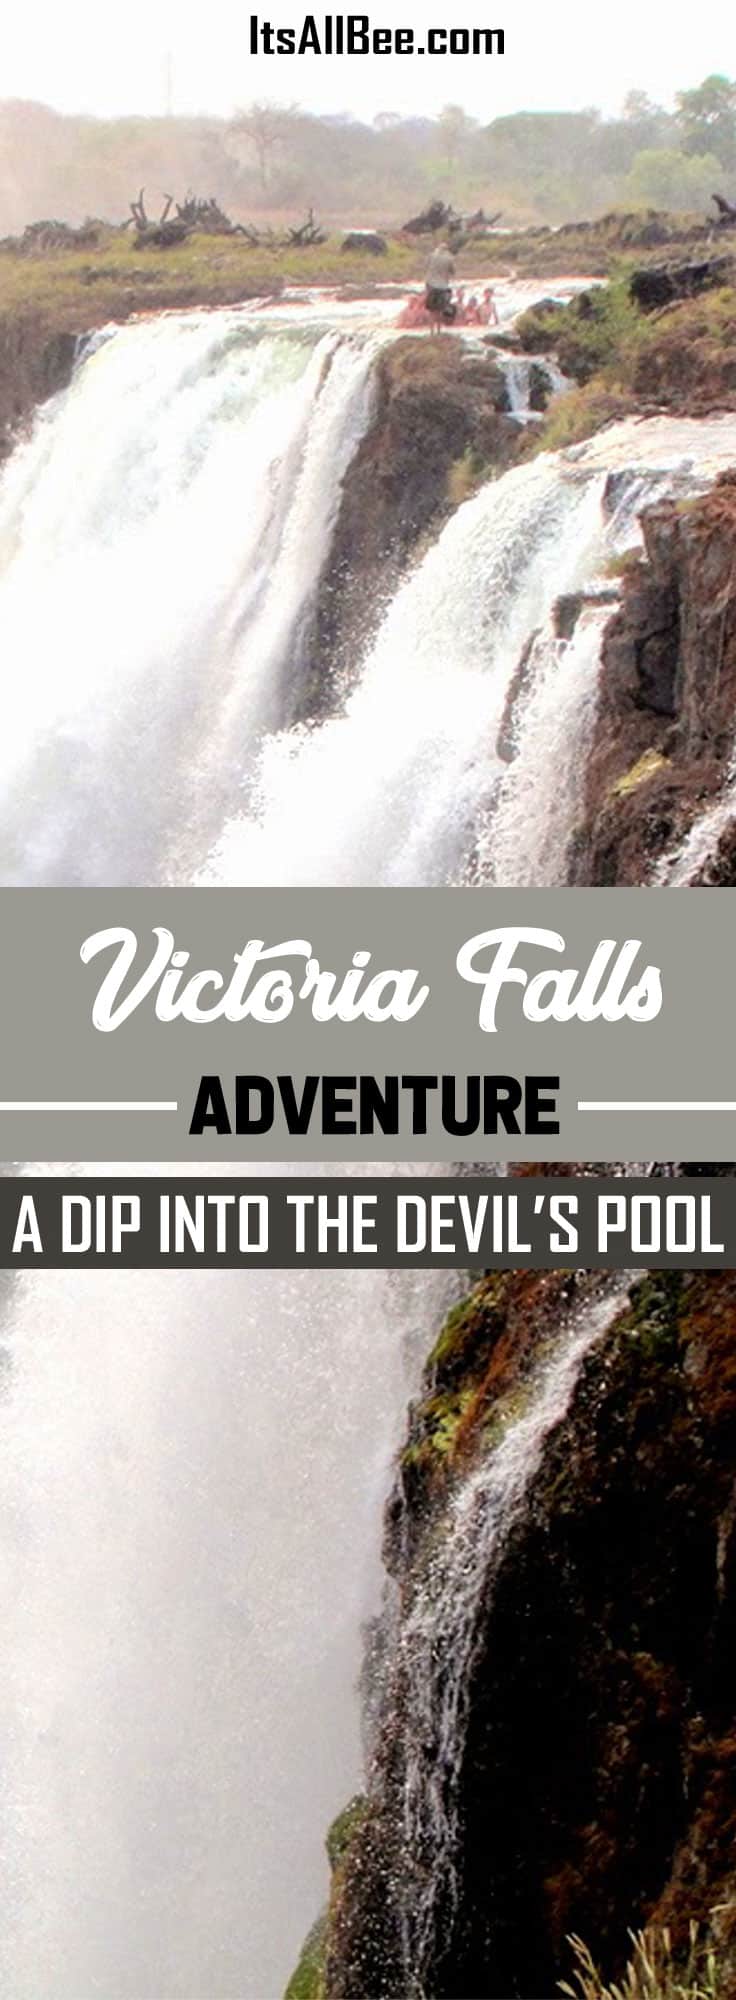  A Dip Into The Devil's Pool At Victoria Falls #itsallbee #traveltips #adventure #vicfalls #africa vacation